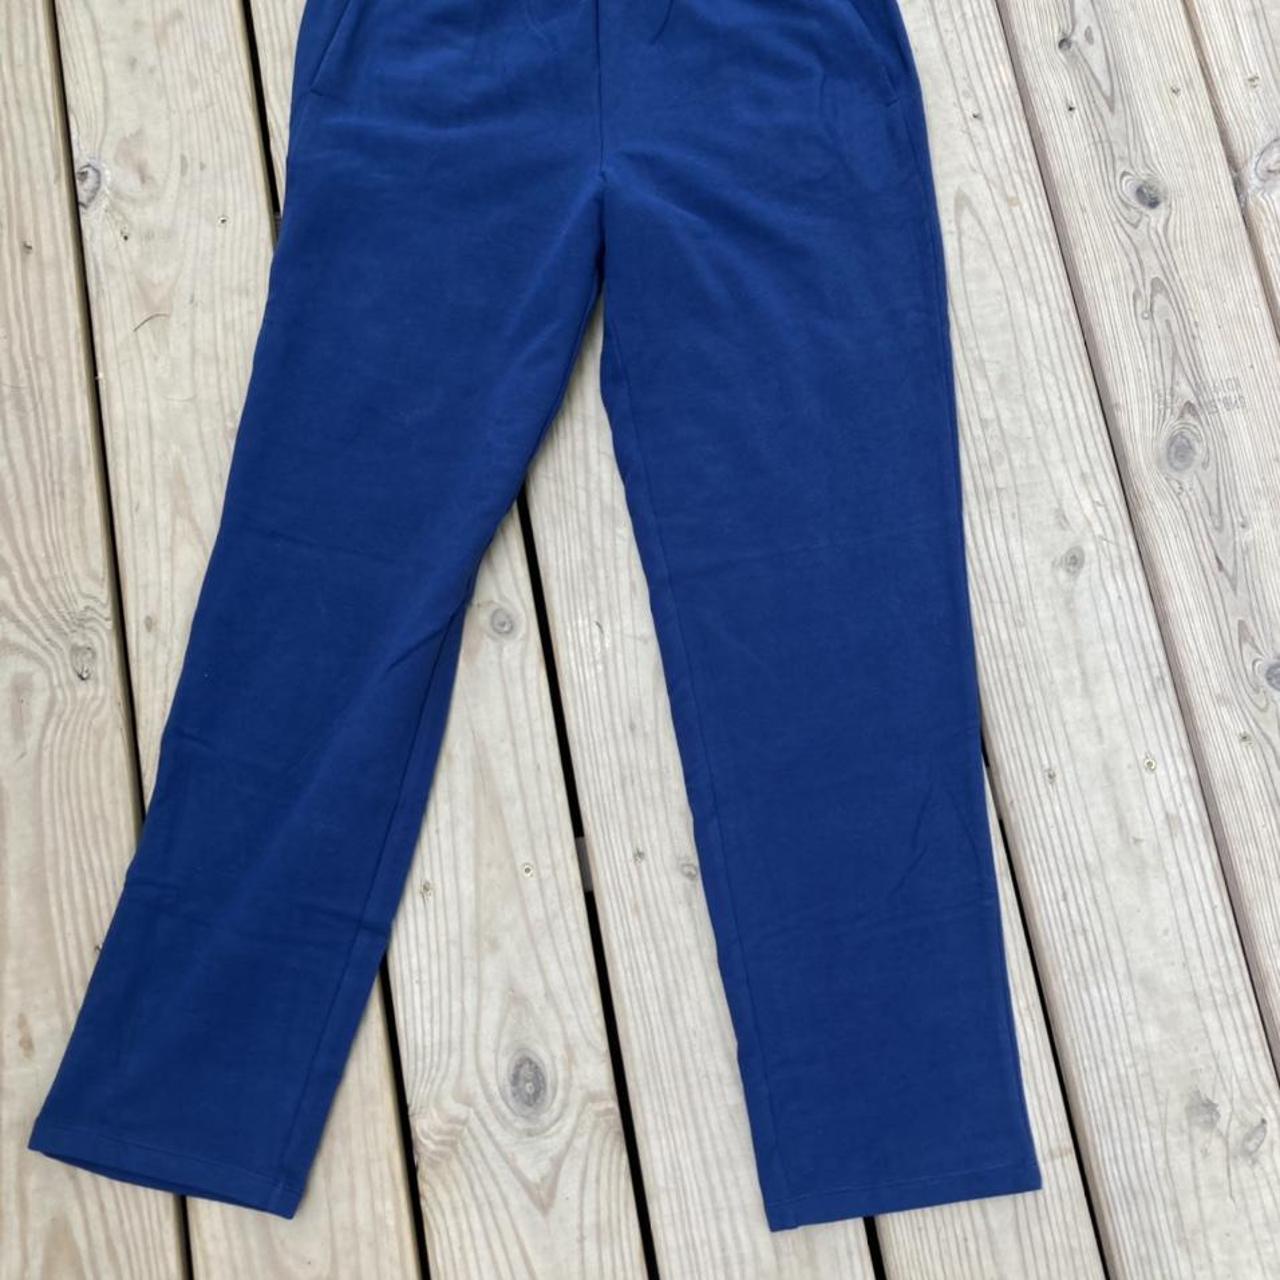 NWT Time and Tru Jogger Fleece Pants I have blue and - Depop